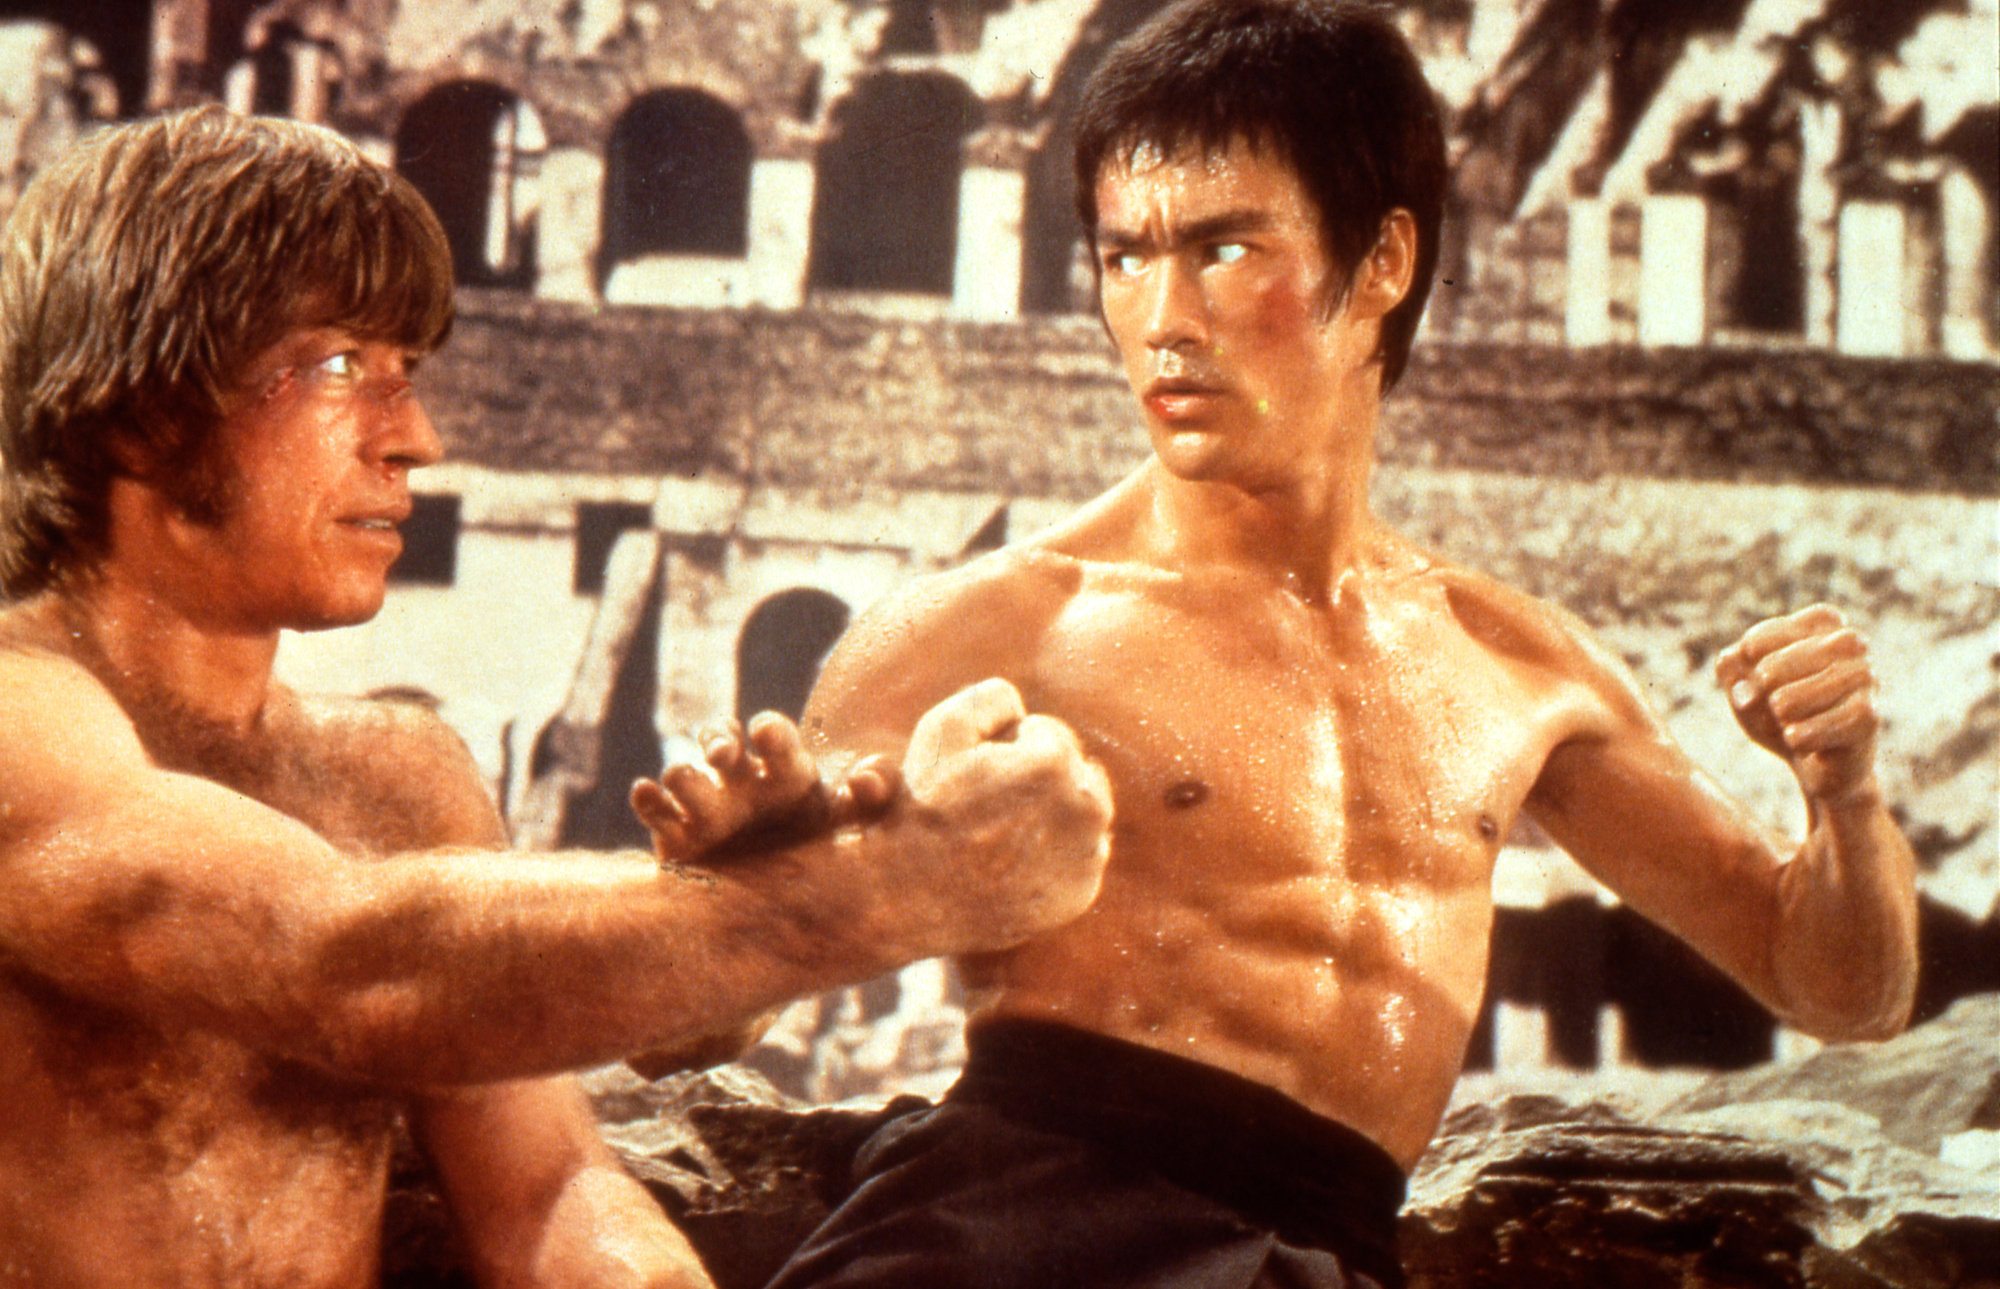 Chuck Norris and Bruce Lee fighting each other in the Roman Colosseum